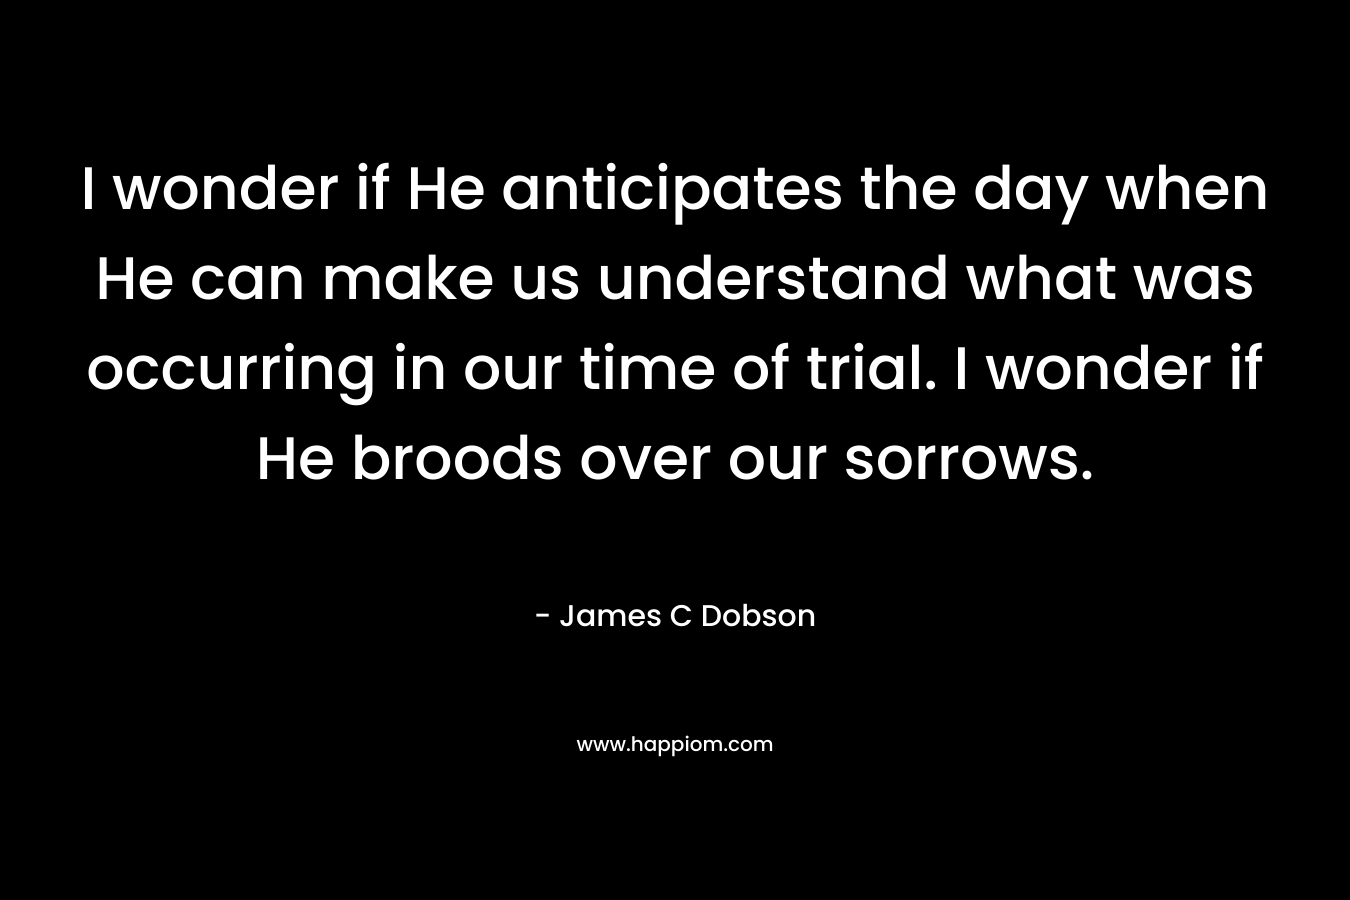 I wonder if He anticipates the day when He can make us understand what was occurring in our time of trial. I wonder if He broods over our sorrows.